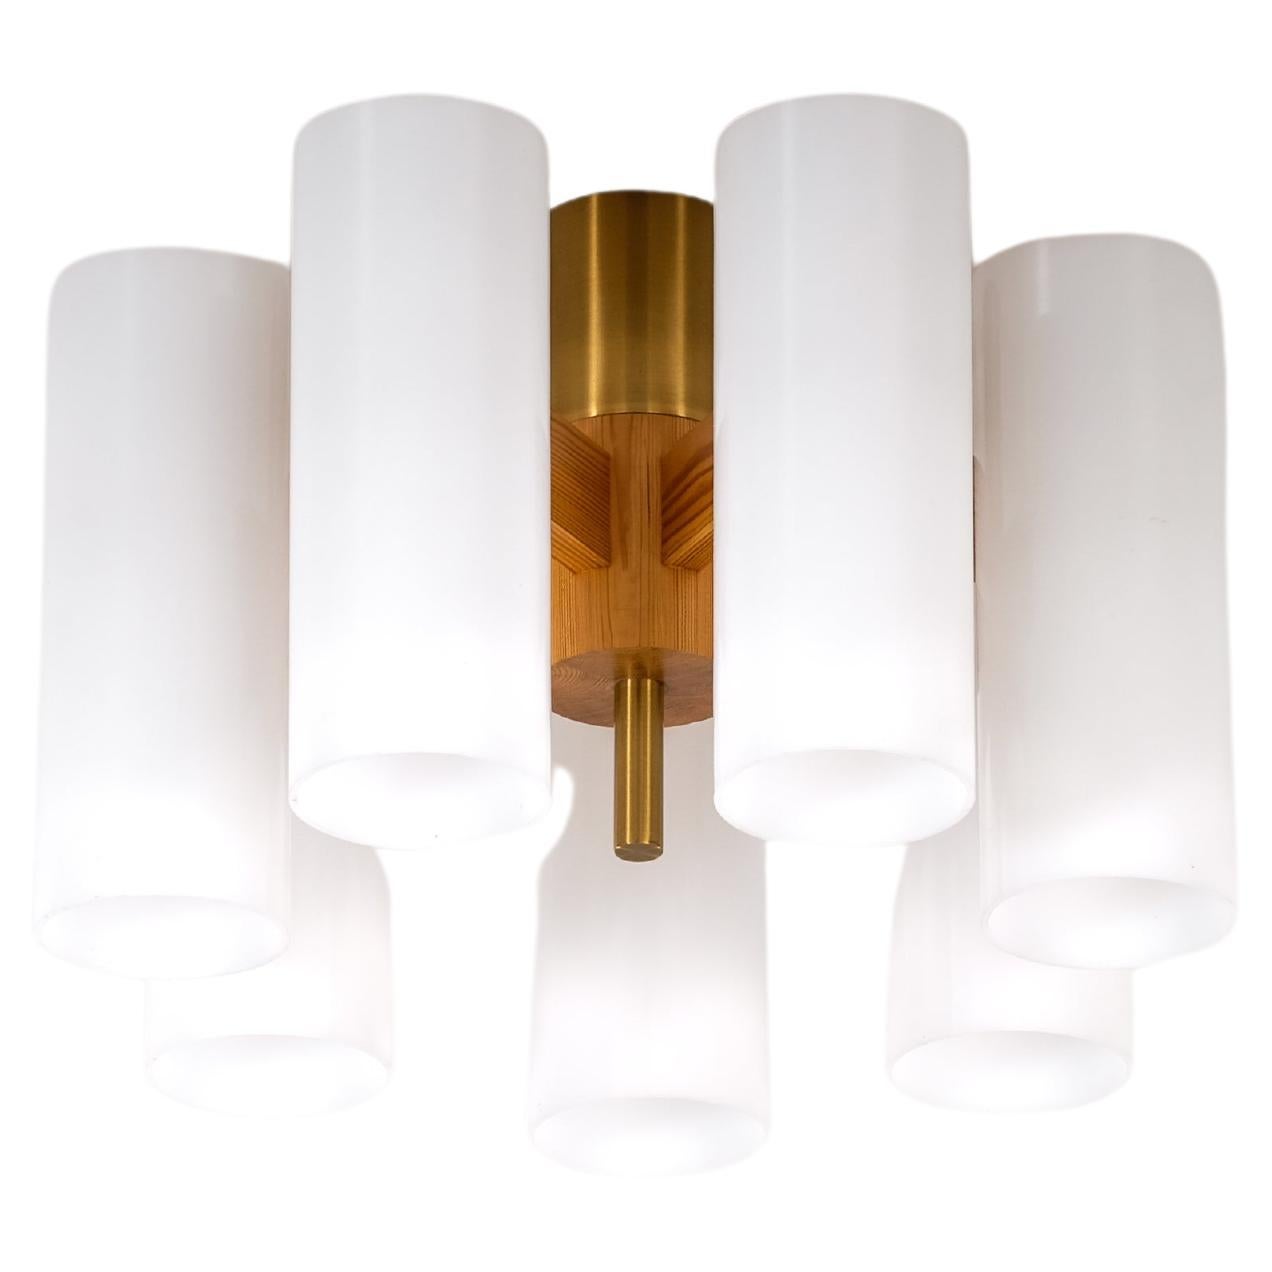 Set of 4 Luxus ceiling lamps by Uno & Östen Kristiansson, 1960s For Sale